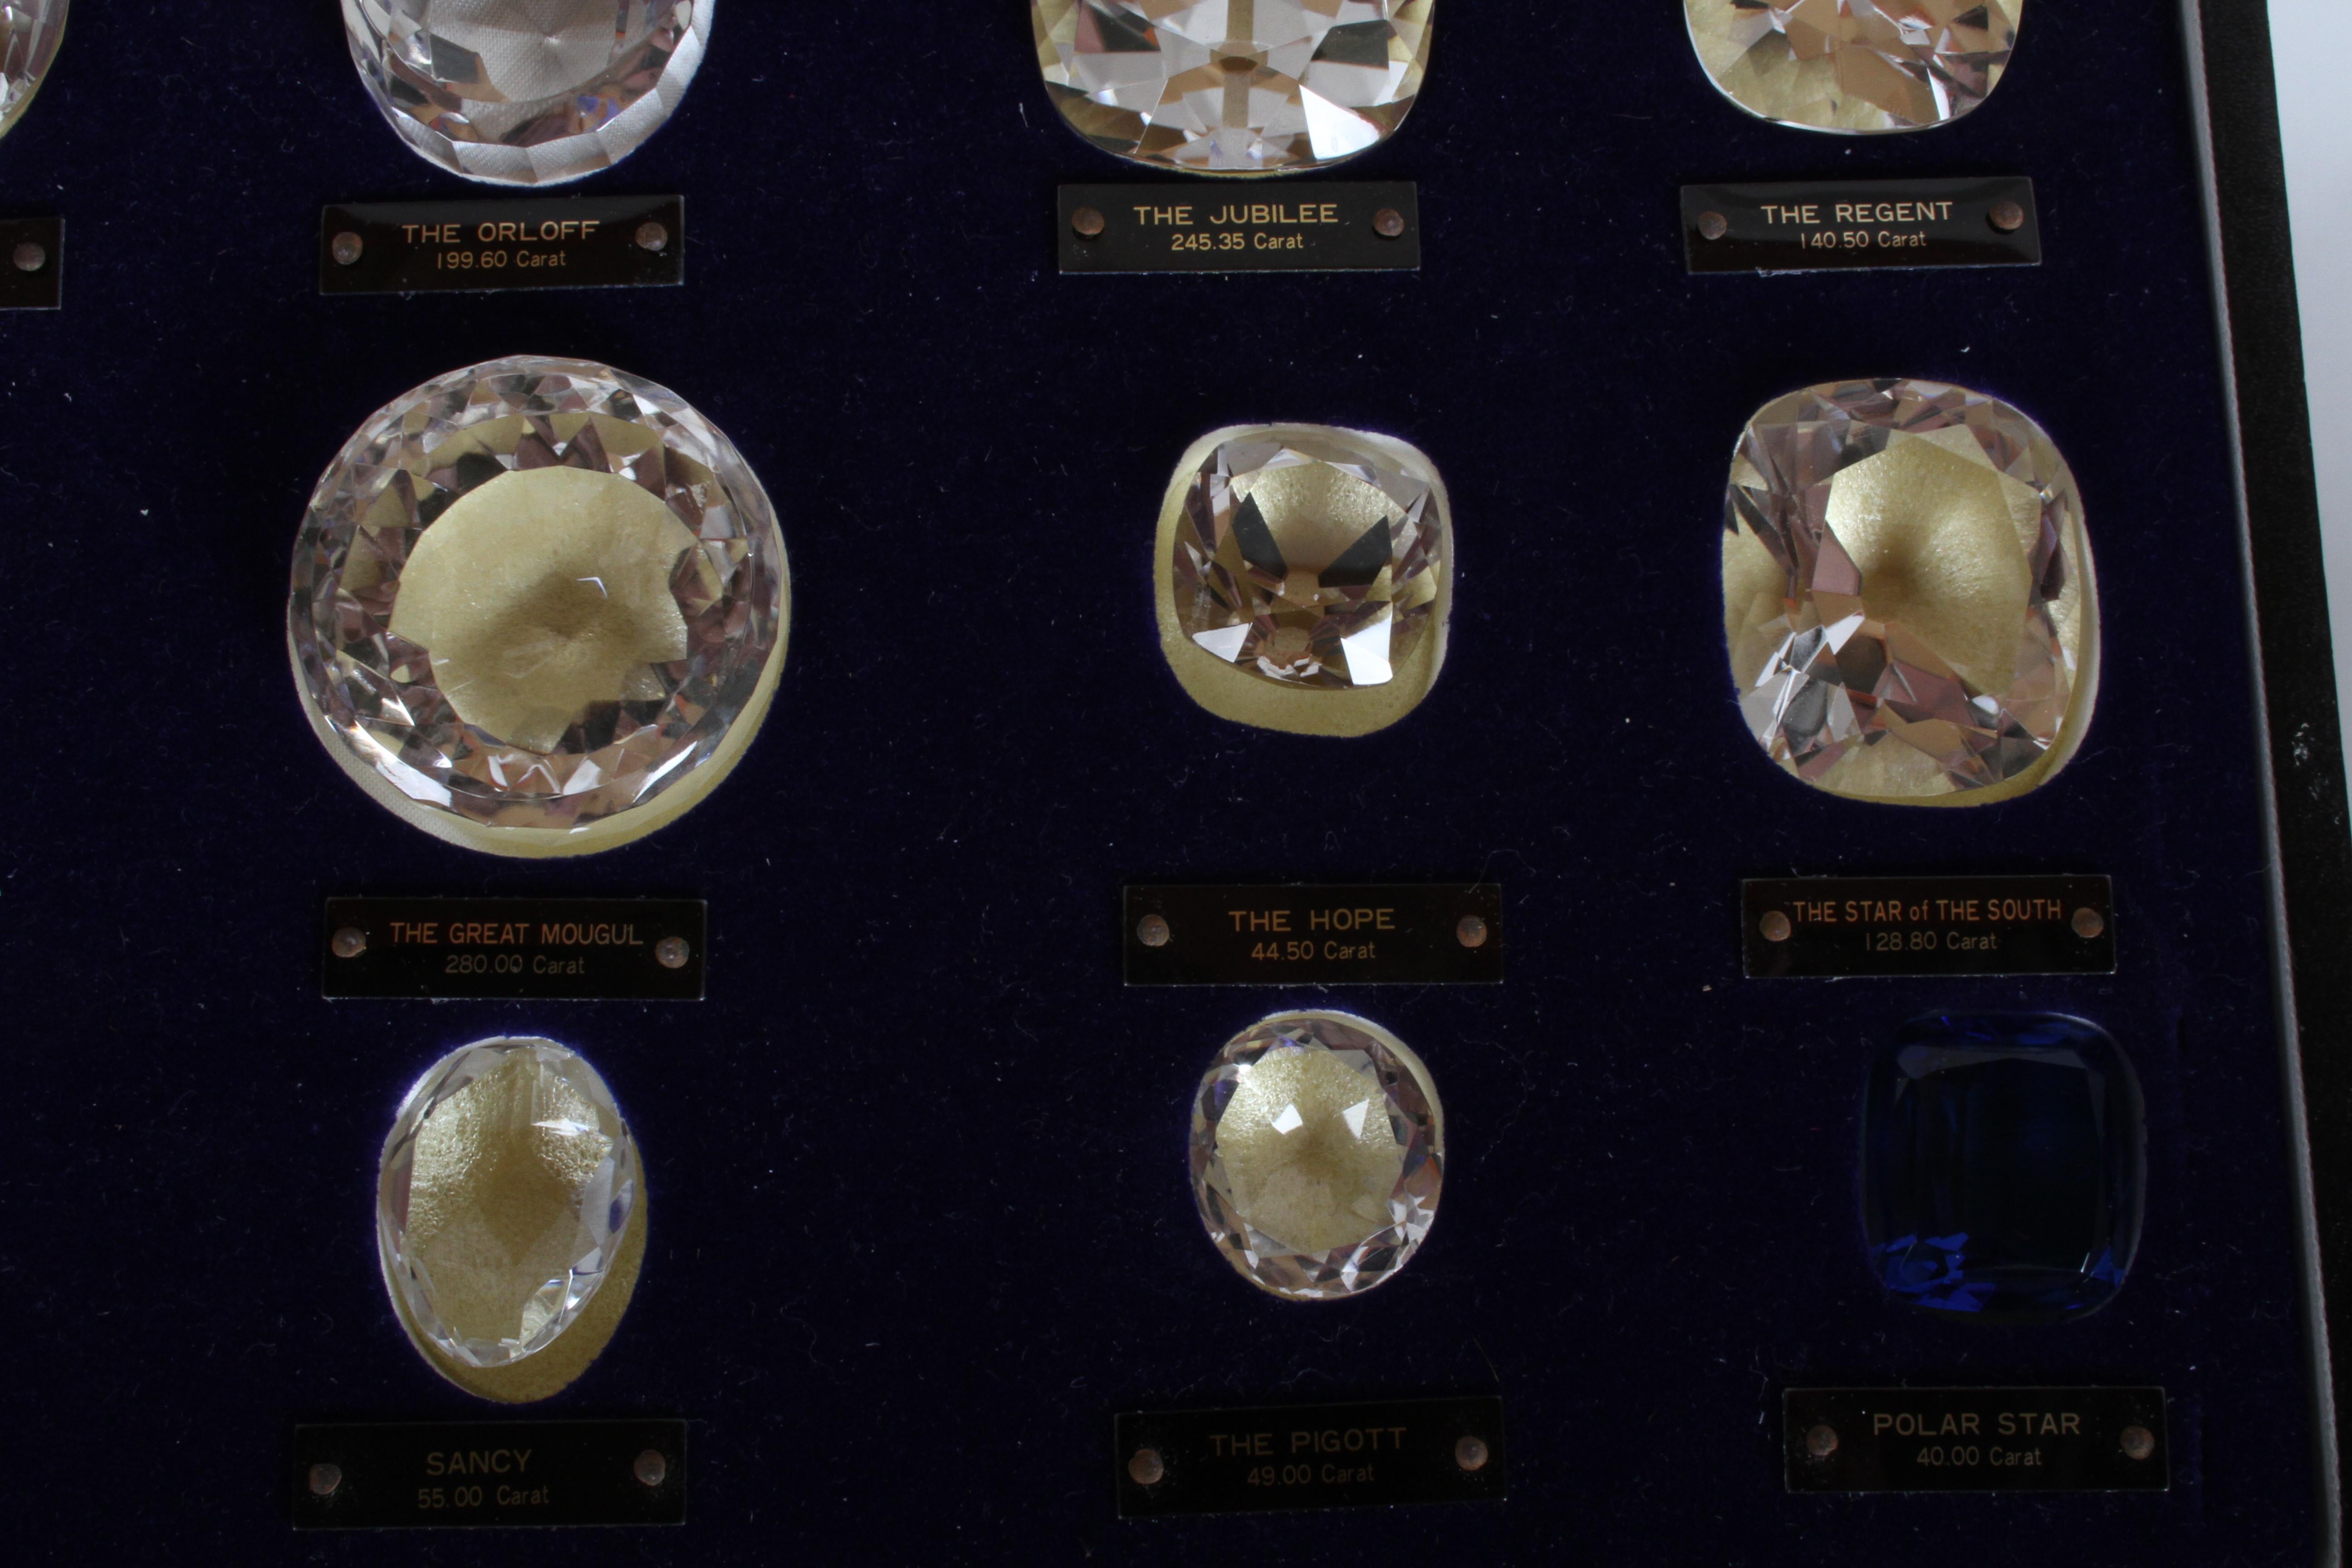 Crystal Antique Set of 15 Historical & Famous Diamonds of the World Replicas in a Case